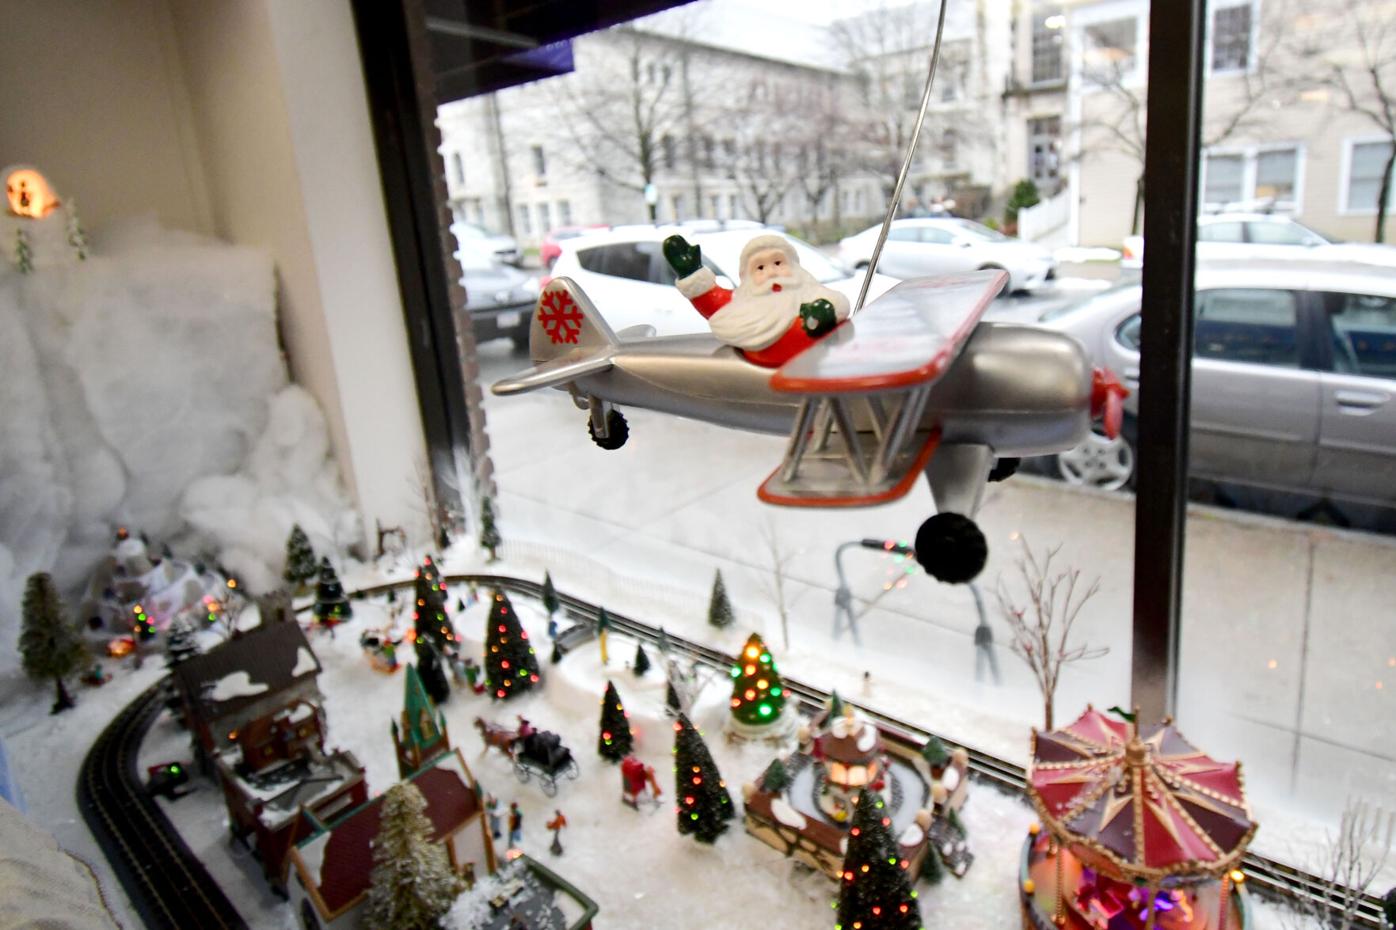 Santa Claus flies in a plane above the Christmas village